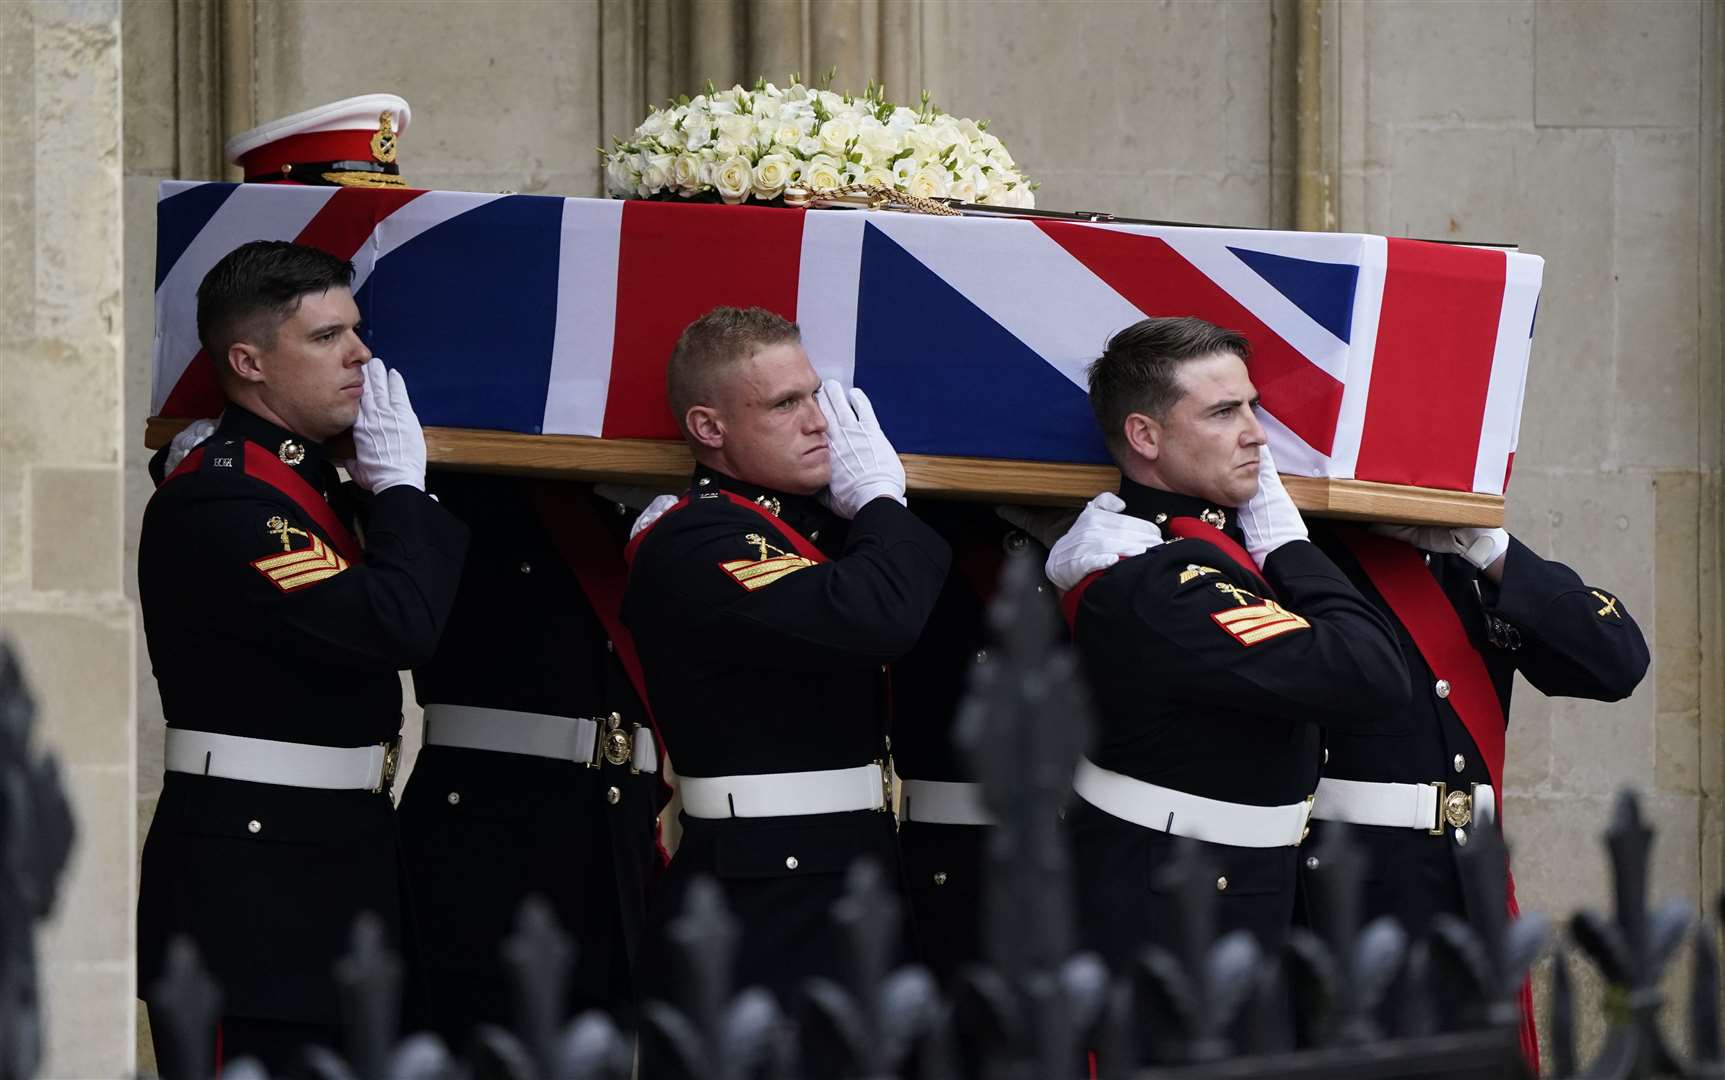 Pallbearers carry the coffin of Major General Matthew Holmes, former head of the Royal Marines, out of Winchester Cathedral following his funeral service (Andrew Matthews/PA)